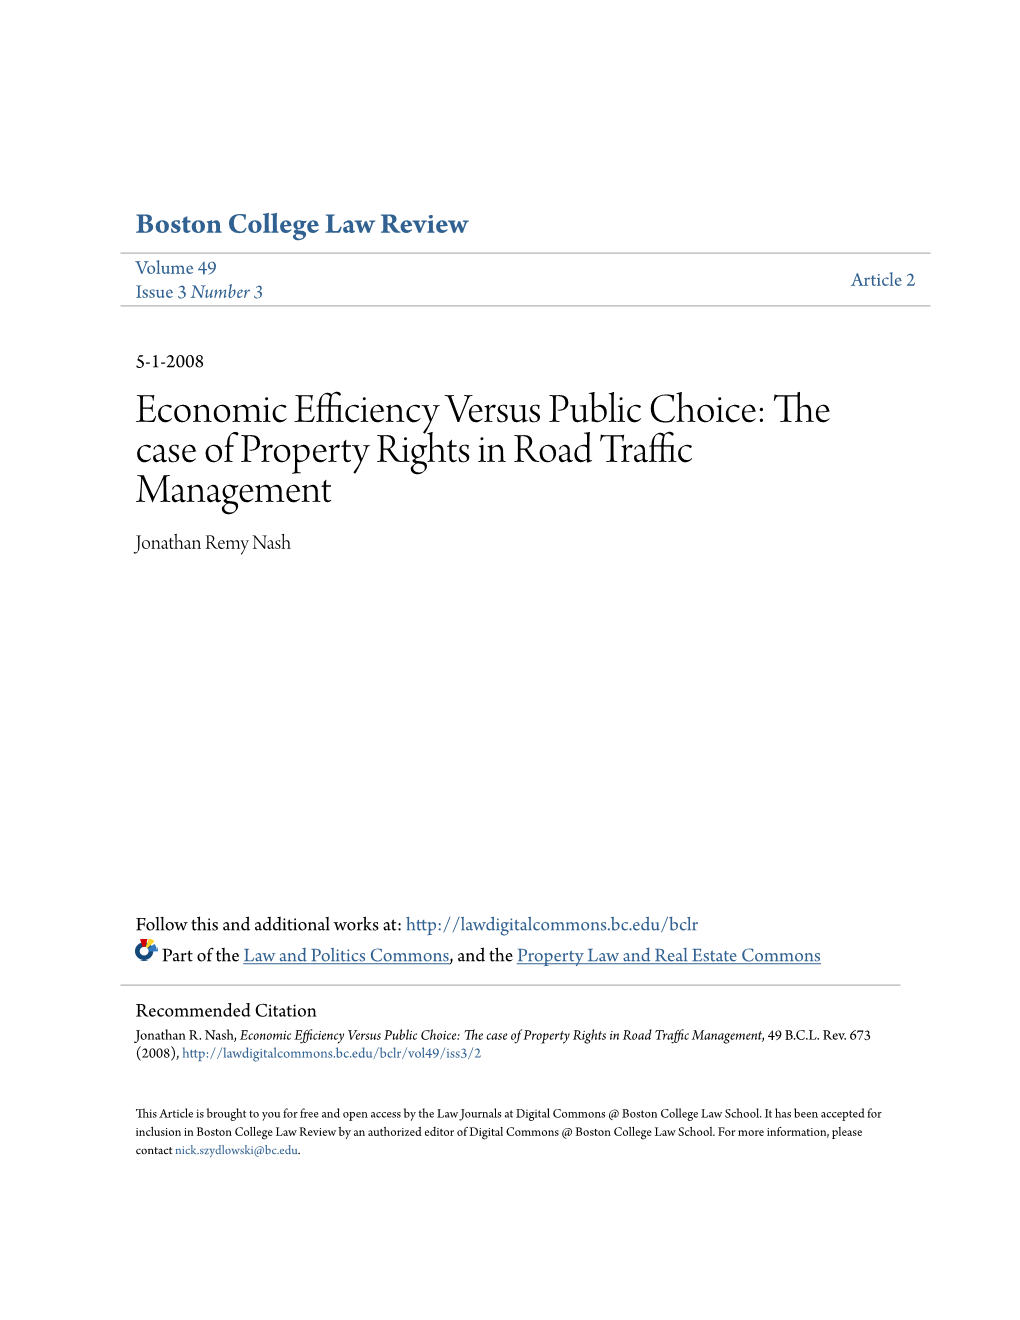 Economic Efficiency Versus Public Choice: the Case of Property Rights in Road Traffic Management Jonathan Remy Nash